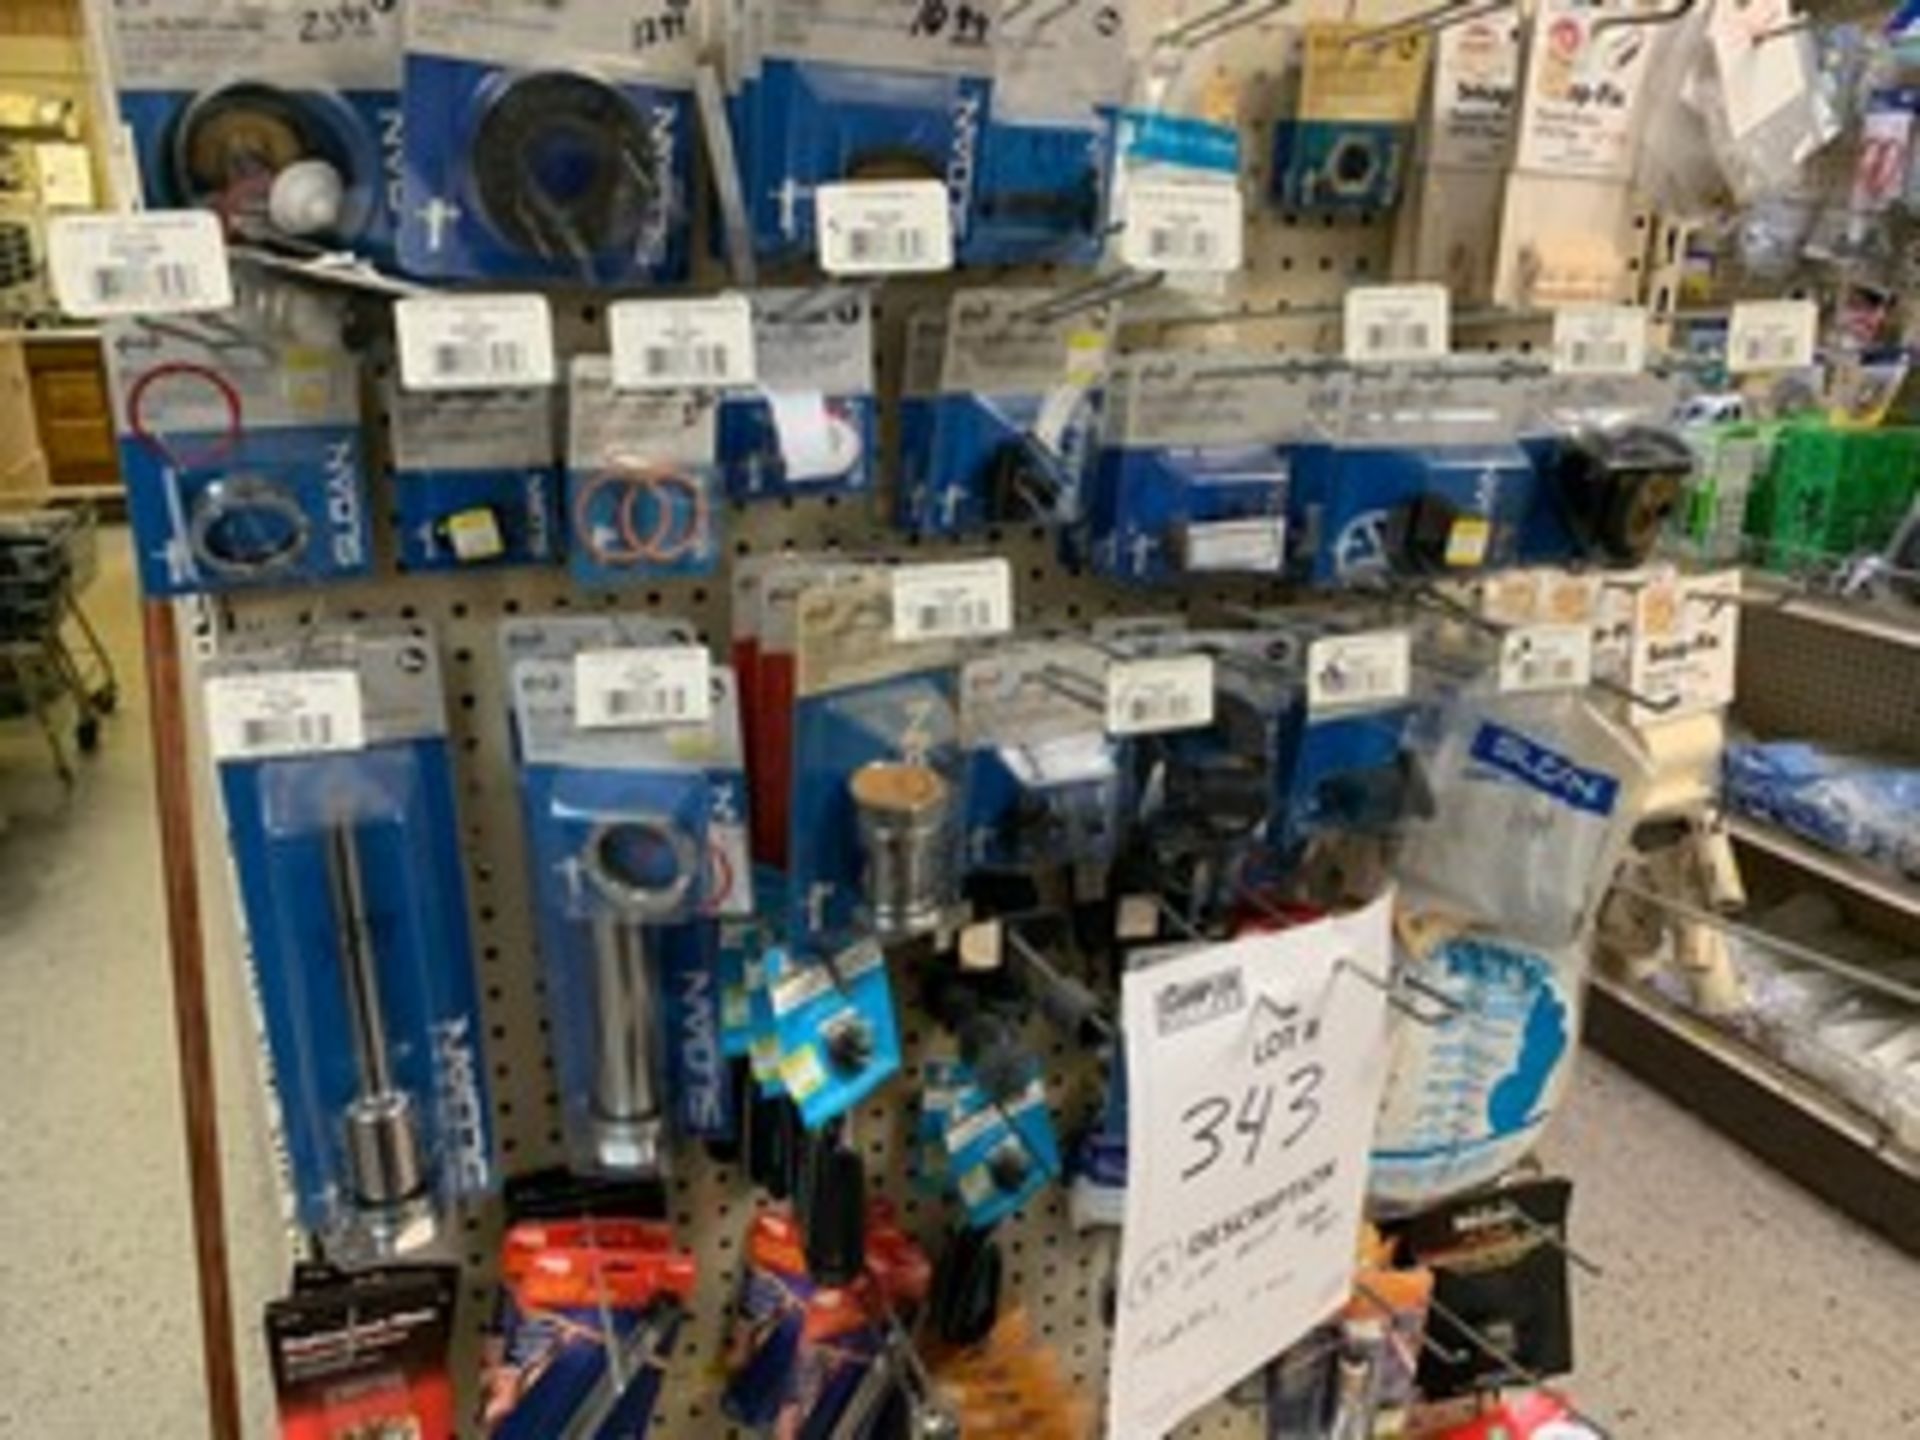 ASSORTED REPAIR PARTS, SOLDERING WIRE, TORCH KITS, ETC - Image 3 of 3